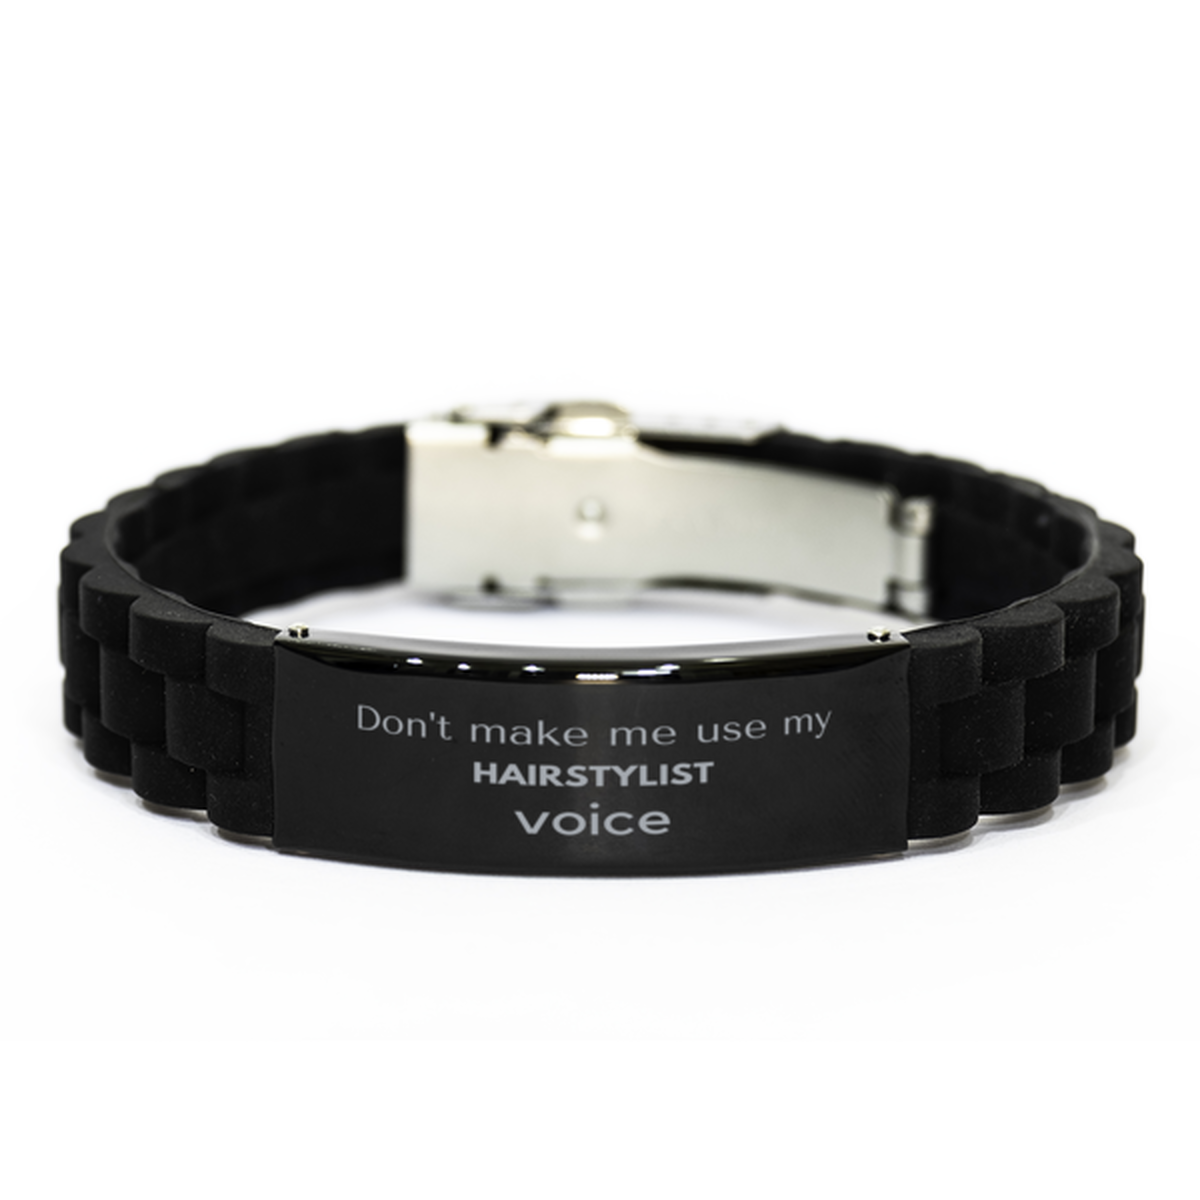 Don't make me use my Hairstylist voice, Sarcasm Hairstylist Gifts, Christmas Hairstylist Black Glidelock Clasp Bracelet Birthday Unique Gifts For Hairstylist Coworkers, Men, Women, Colleague, Friends